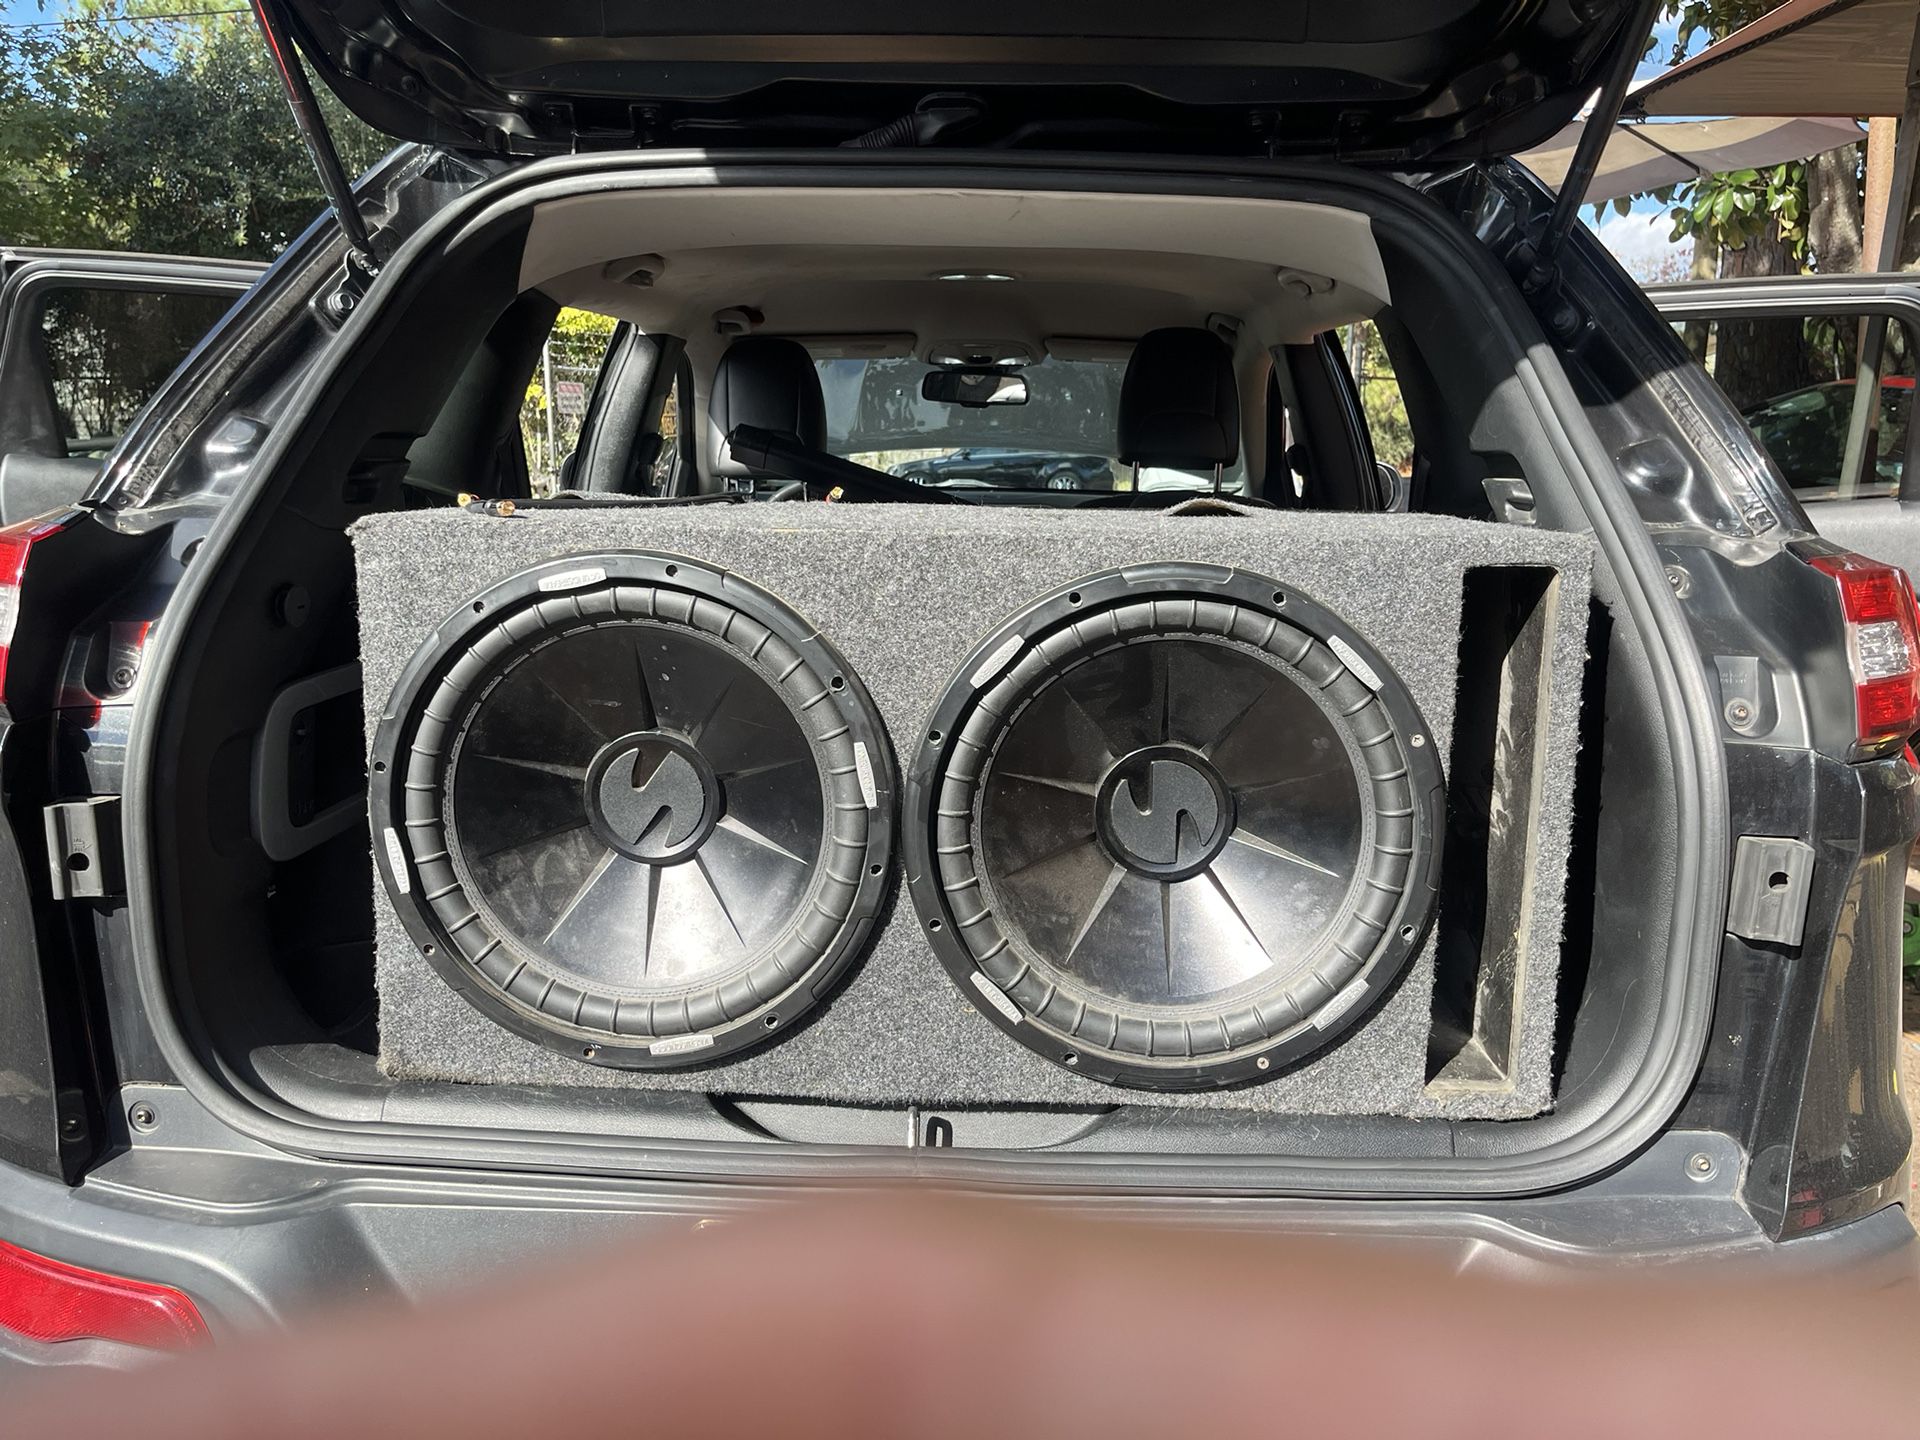 2- 15” subwoofers and 2500w amp